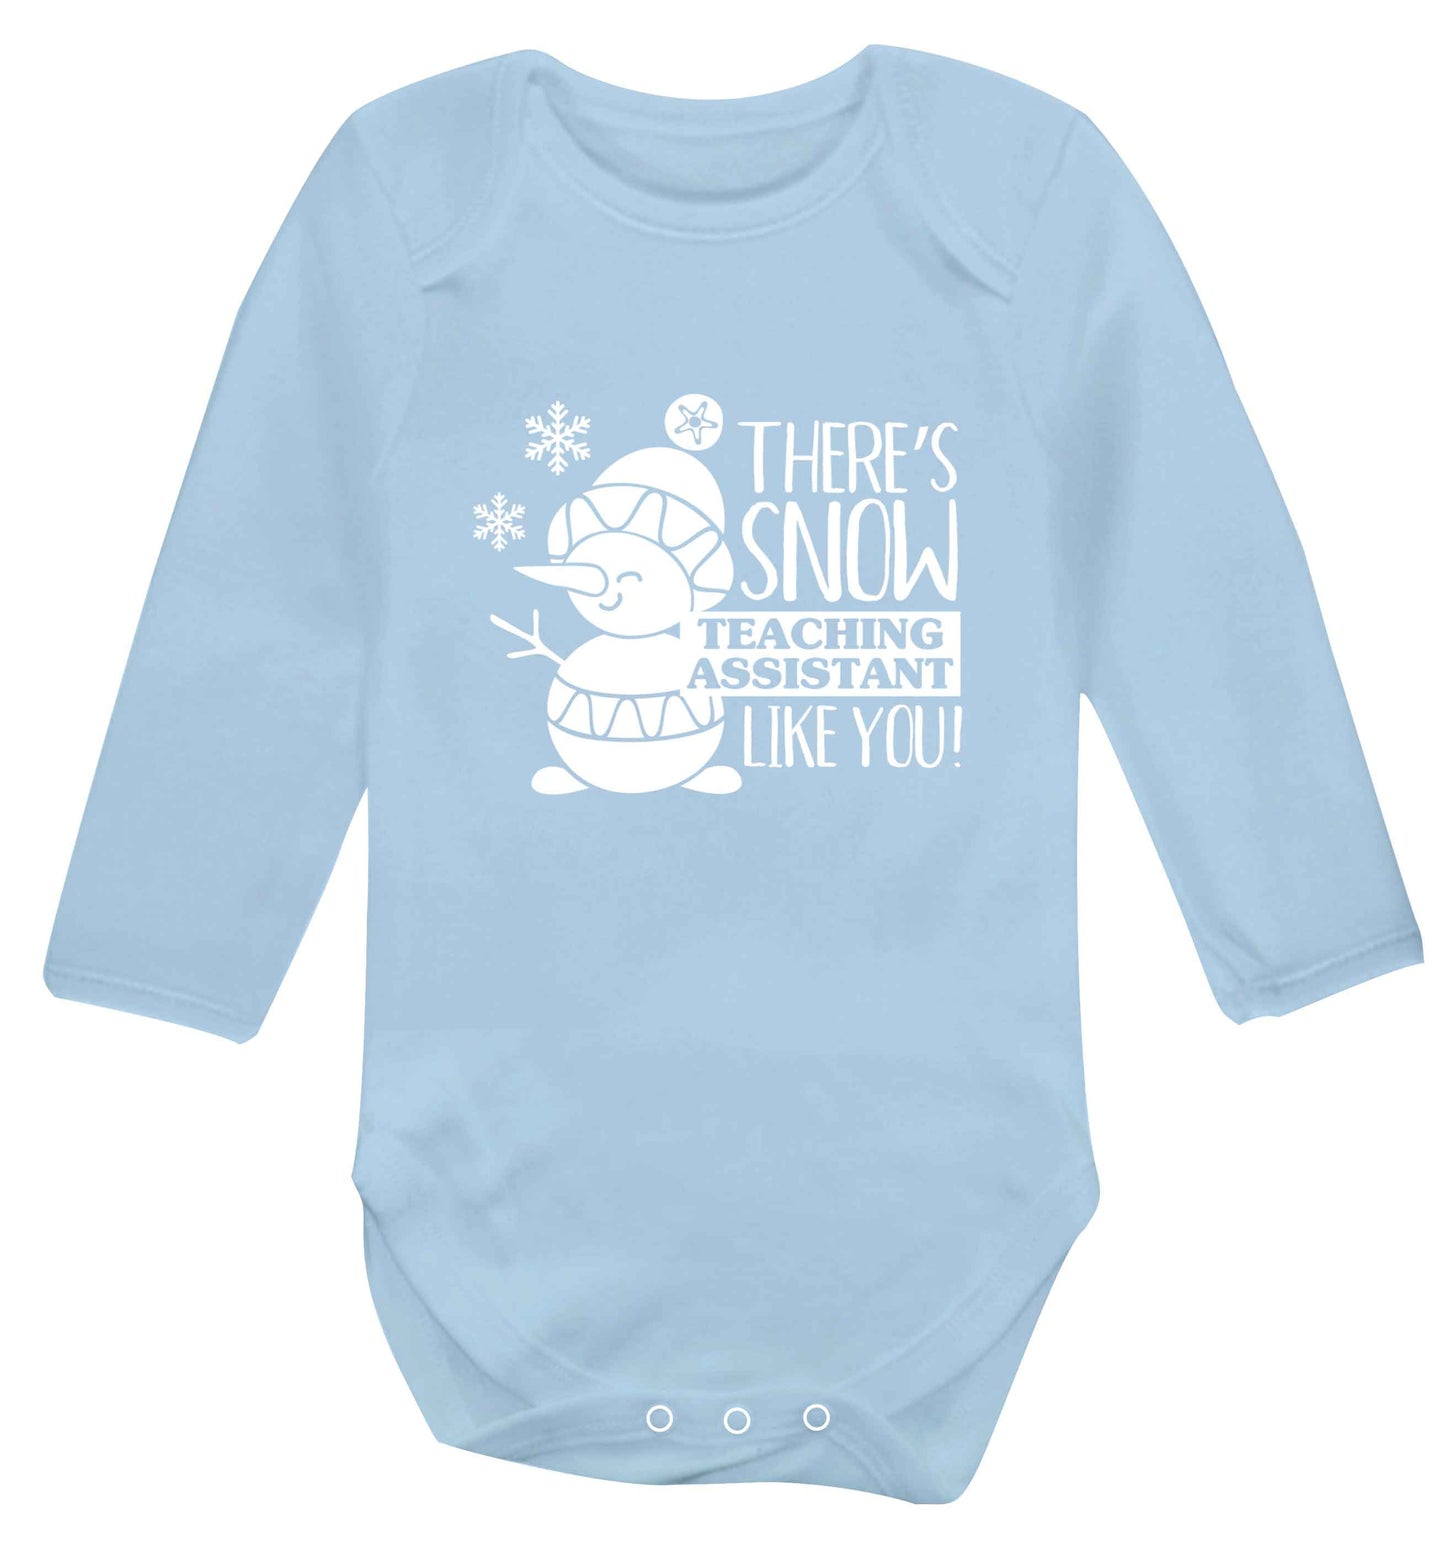 There's snow teaching assistant like you baby vest long sleeved pale blue 6-12 months